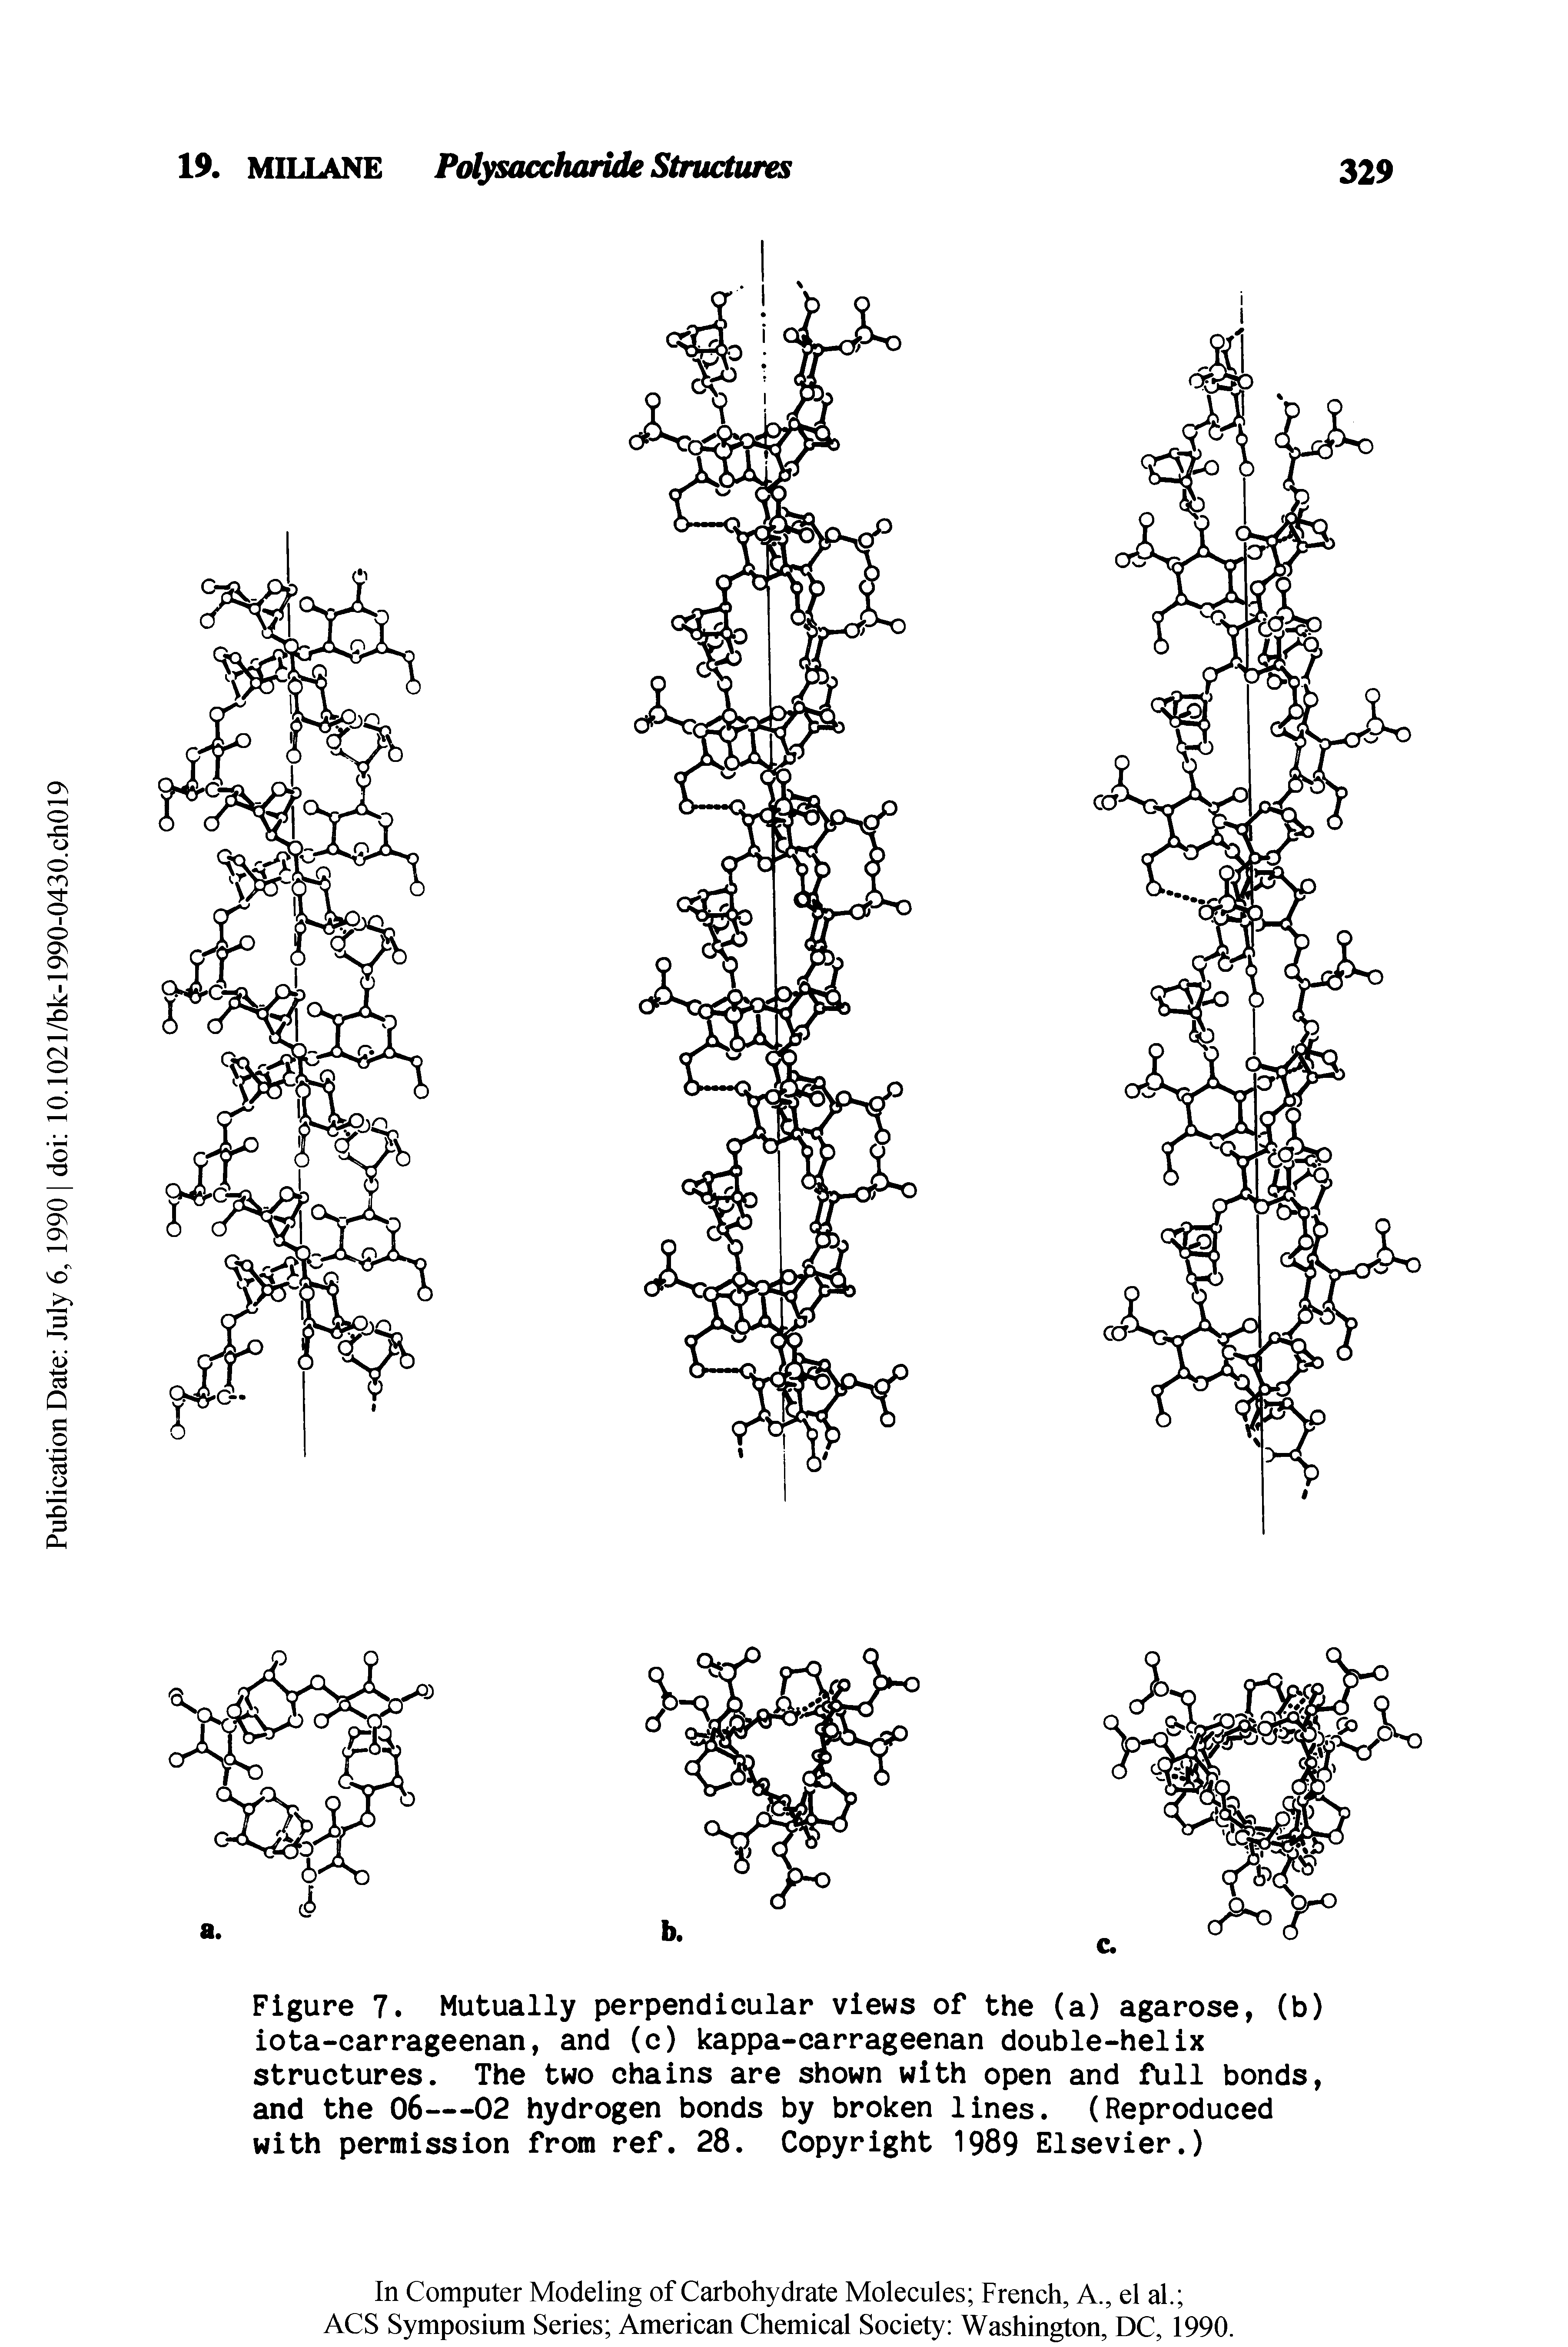 Figure 7. Mutually perpendicular views of the (a) agarose, (b) iota-carrageenan, and (c) kappa-carrageenan double-helix structures. The two chains are shown with open and full bonds, and the 06—02 hydrogen bonds by broken lines. (Reproduced with permission from ref. 28. Copyright 1989 Elsevier.)...